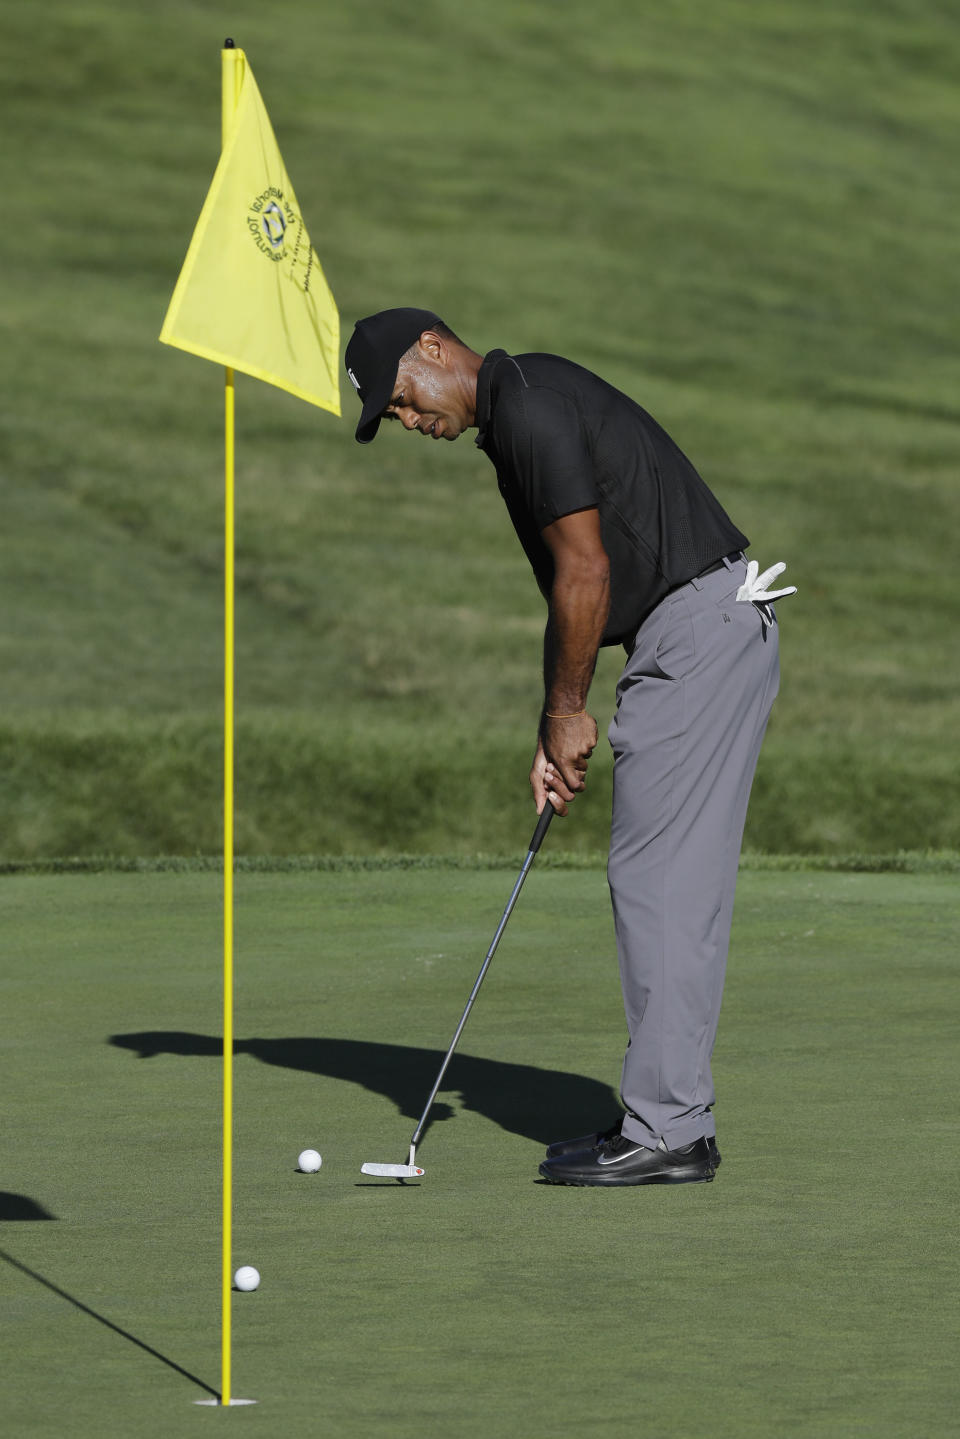 Tiger Woods putts on the 13th green during a practice round for the Memorial golf tournament, Tuesday, July 14, 2020, in Dublin, Ohio. (AP Photo/Darron Cummings)